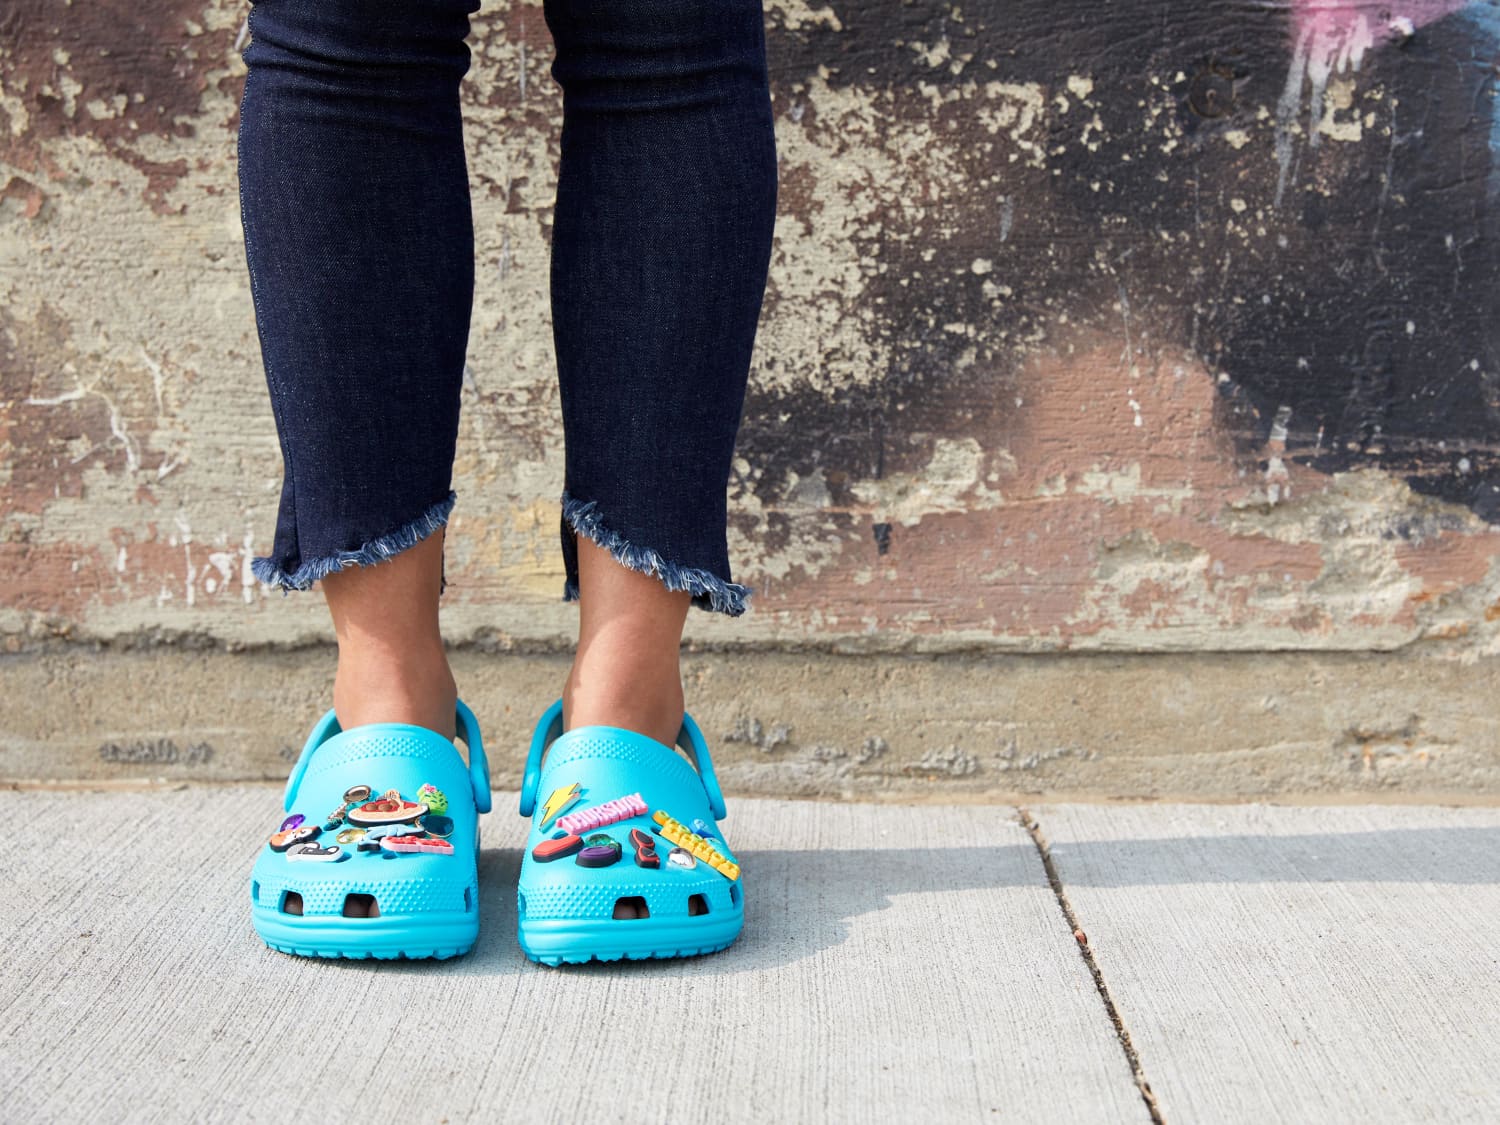 An Honest Review of Crocs as House Shoes | Apartment Therapy